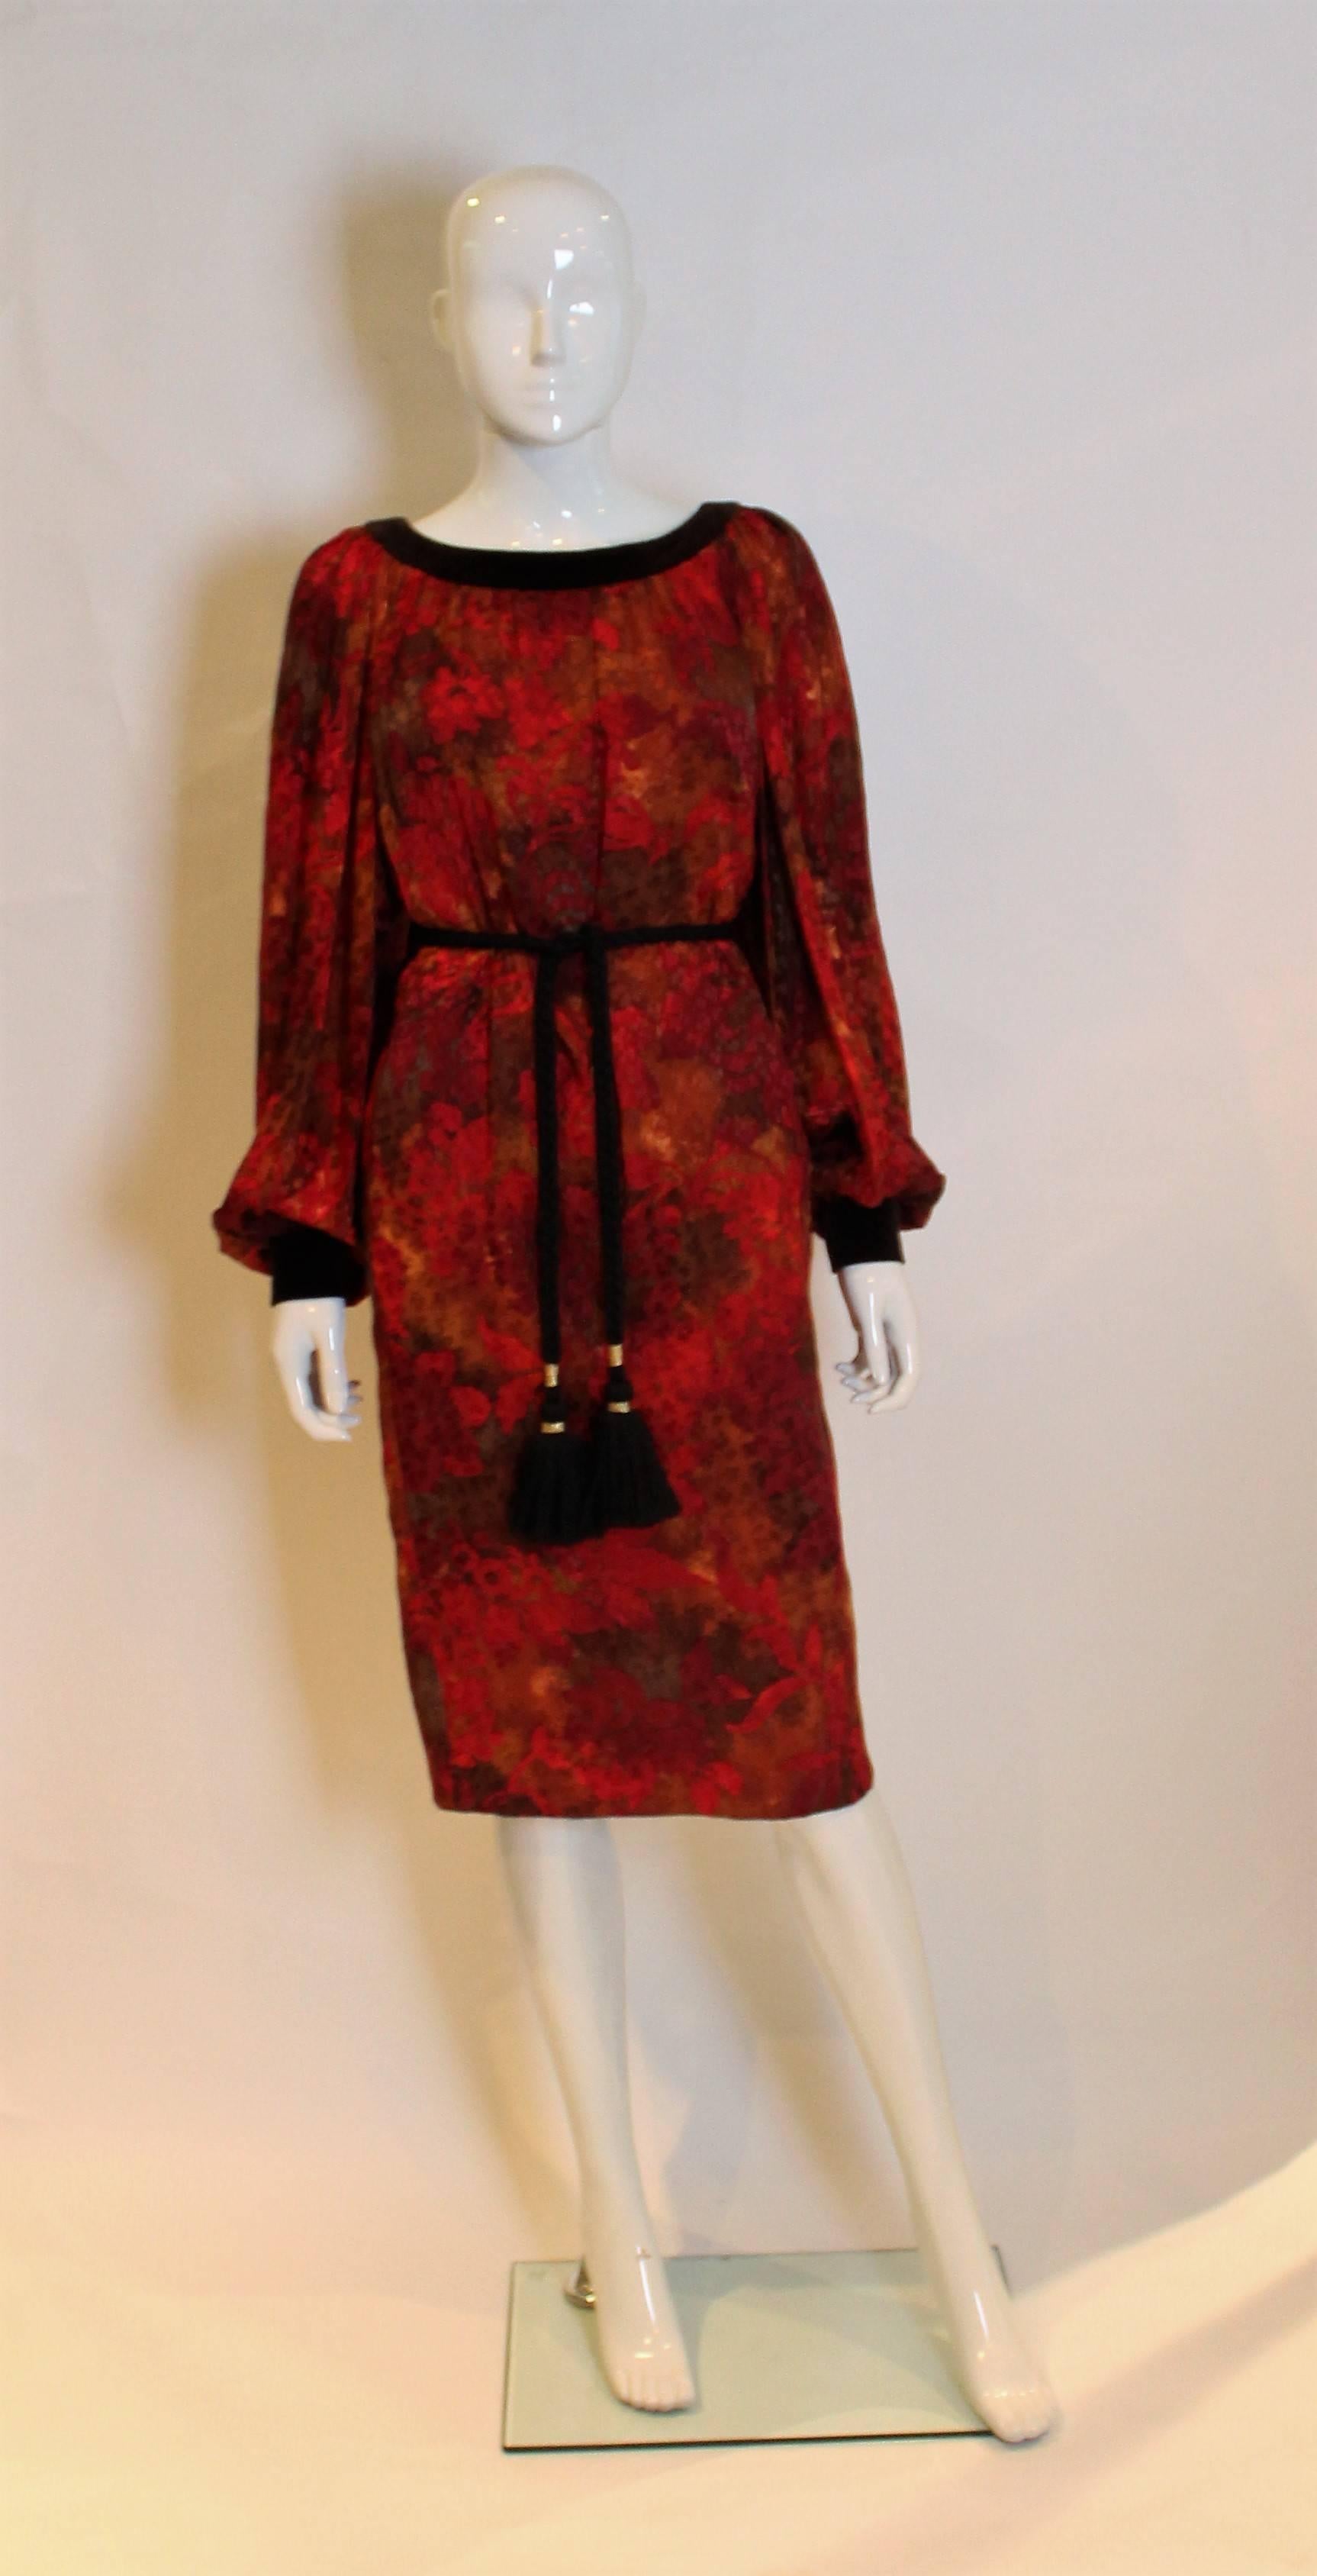 
A great dress by Yves Saint Laurent, Patron Original ,number 56337.
The dress is a wonderful mix of autumn colours , with silk velvet trim and cuffs and silk lining. It has a deep round neckline at the front and deeper neckline at the back.There is